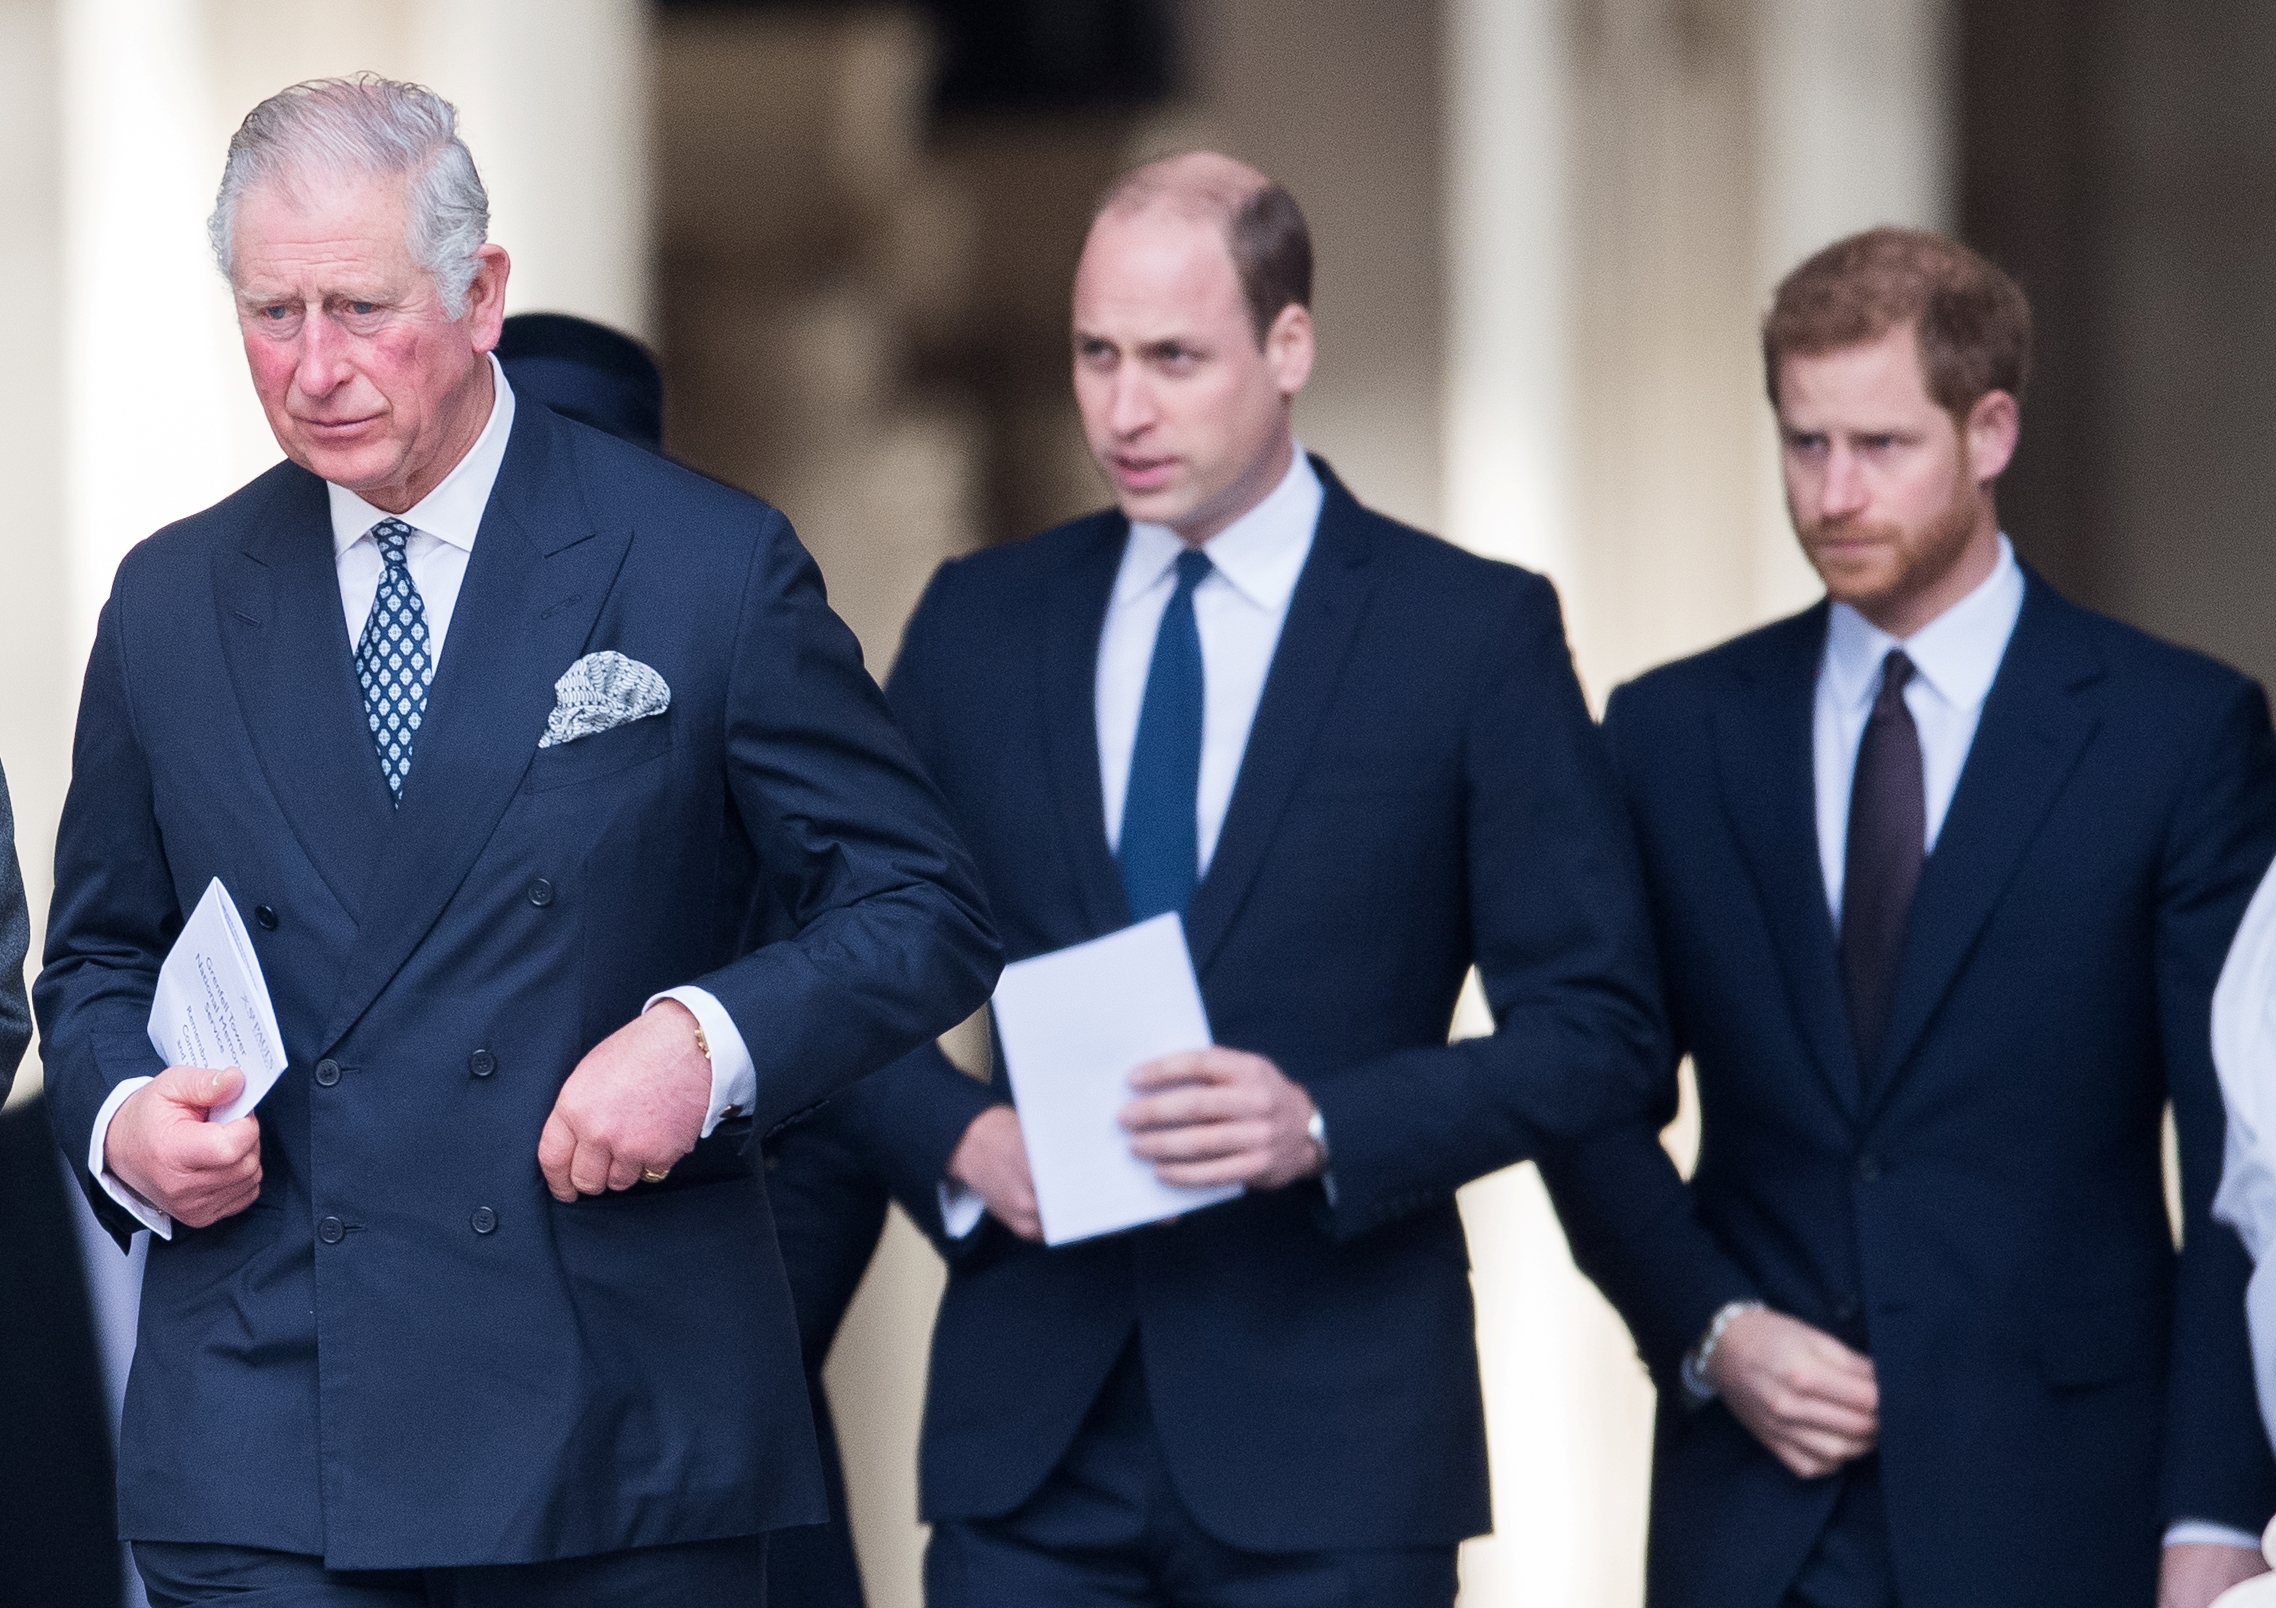 Prince Charles, Prince William, and Prince Harry attending a memorial service at St Paul's Cathedral